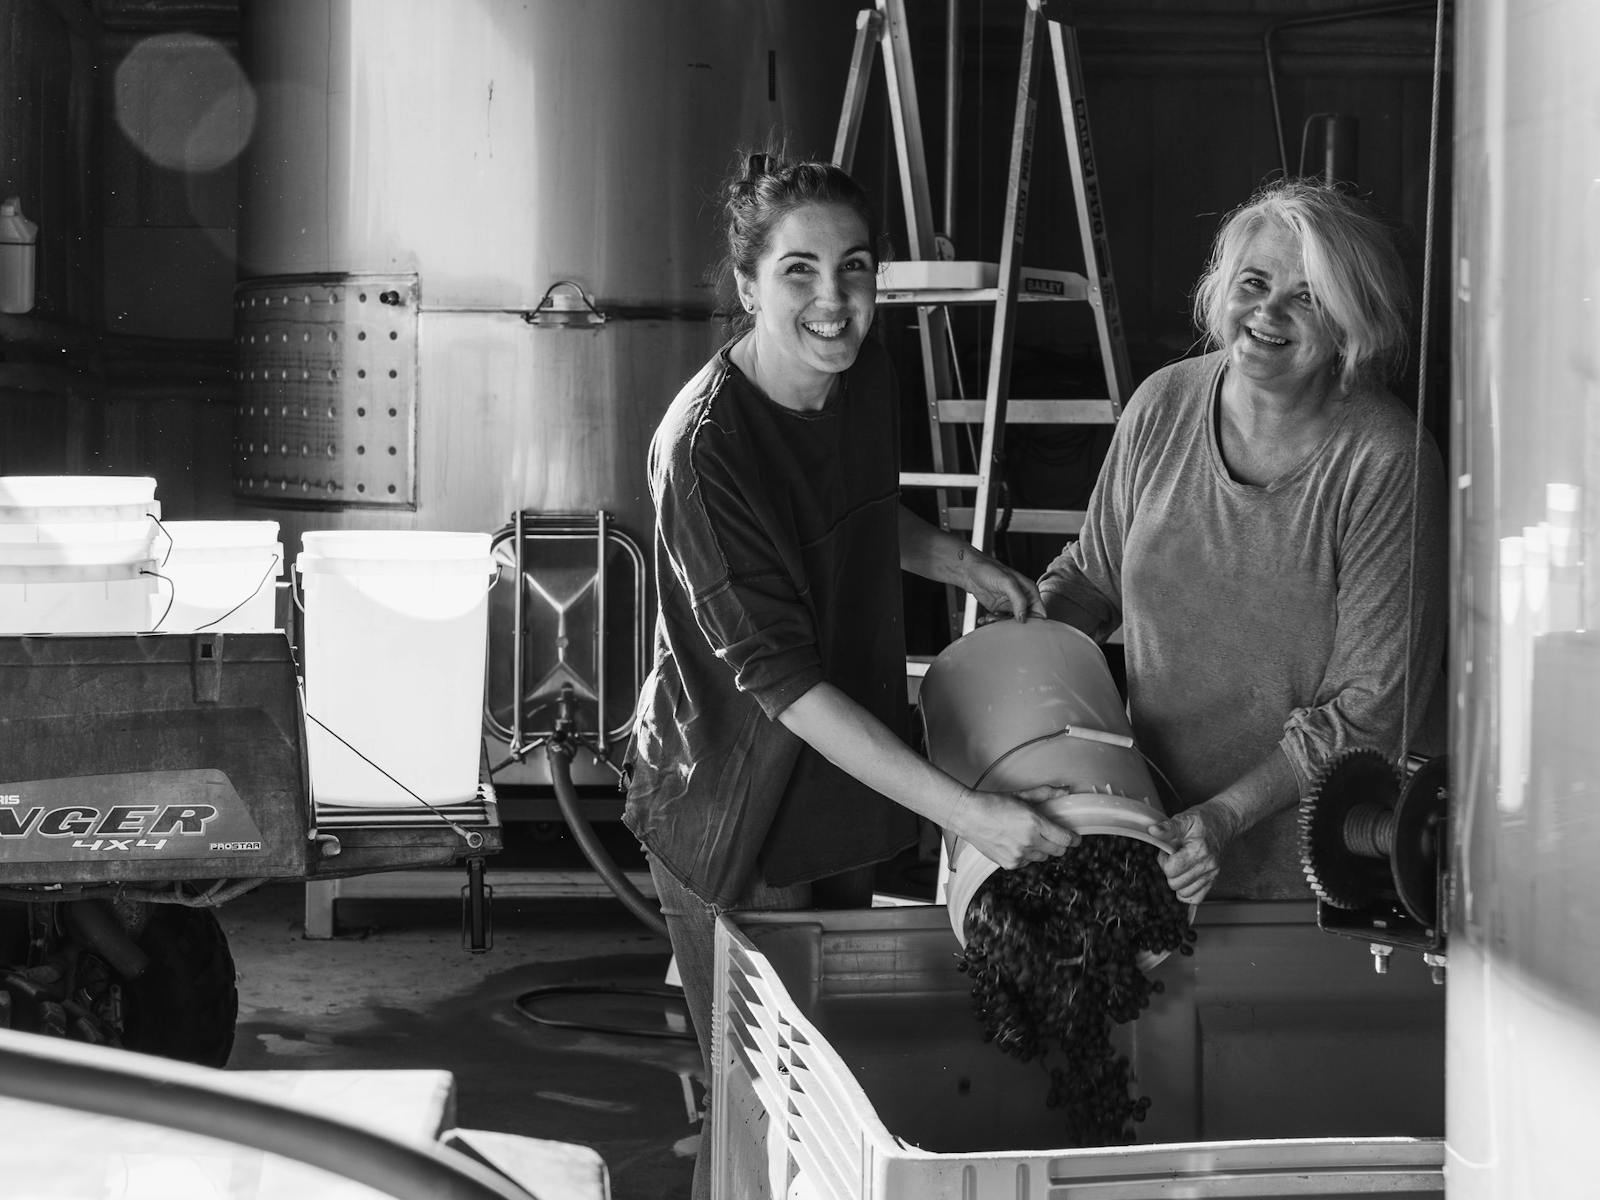 Jo & Allie working in the winery, bucketing grapes from the vineyard into fermentation bins